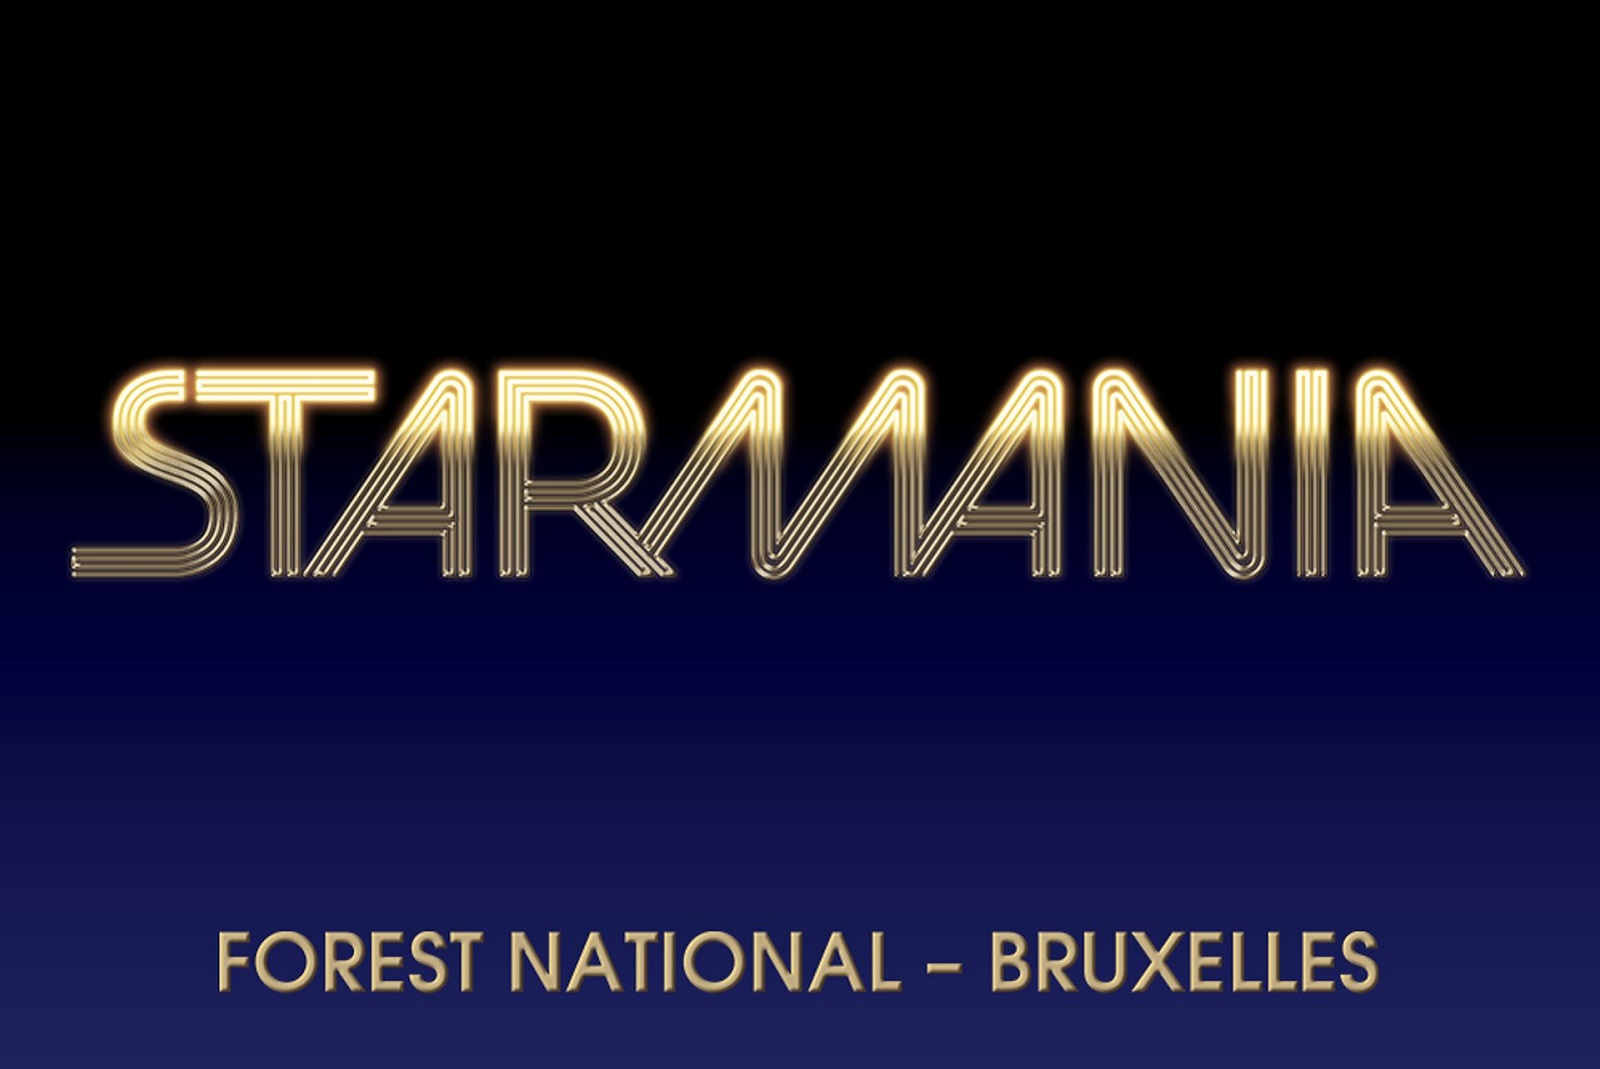 starmania forest national